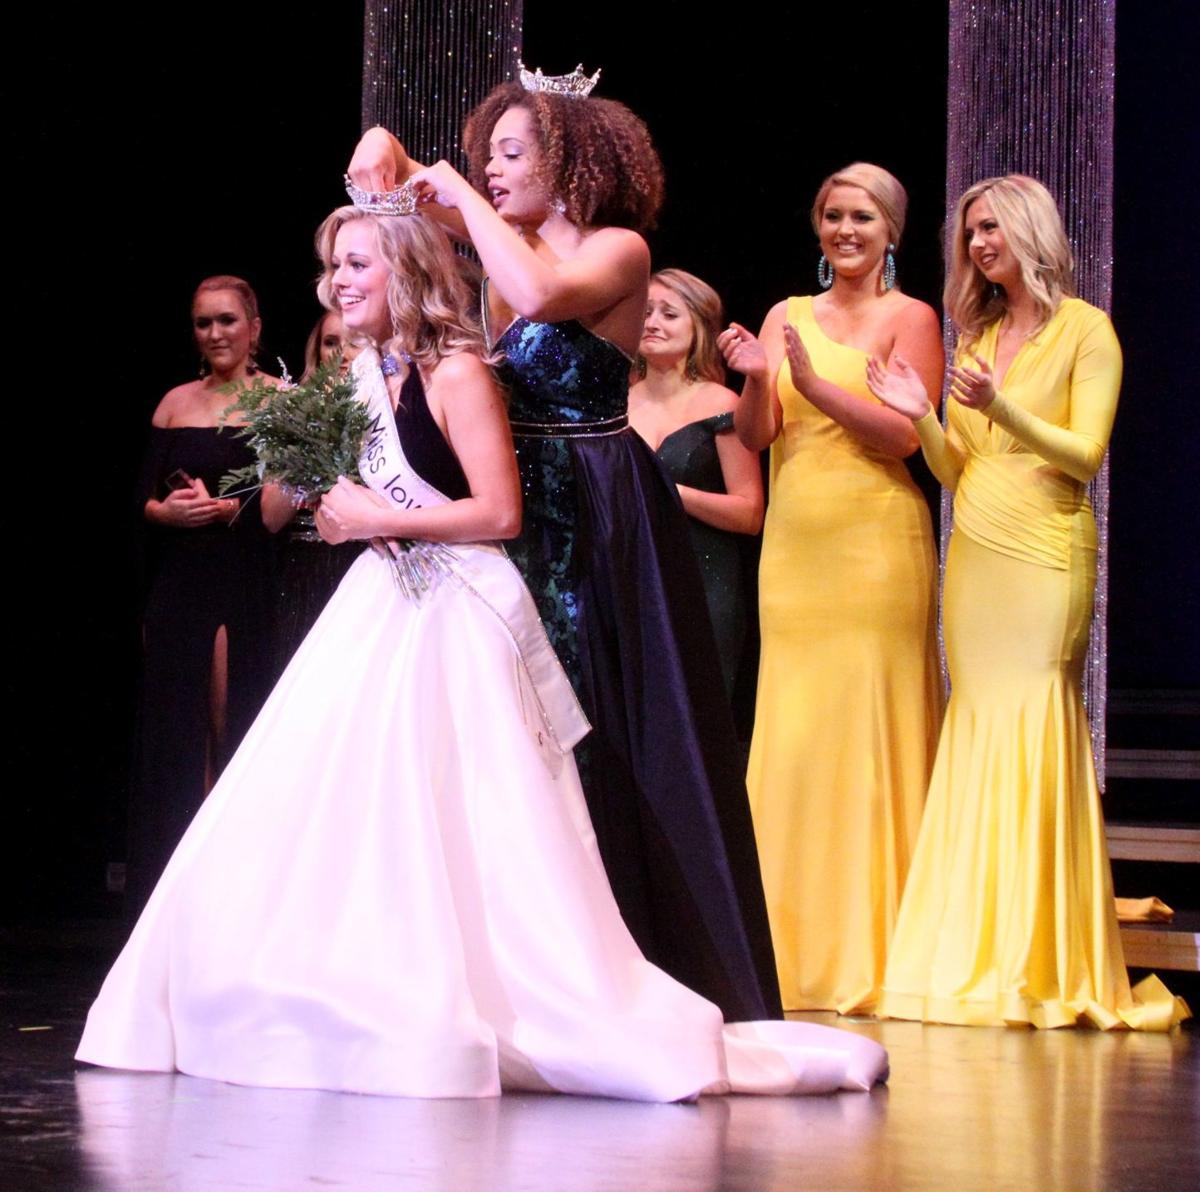 Bettendorf's Emily Tinsman is crowned Miss Iowa